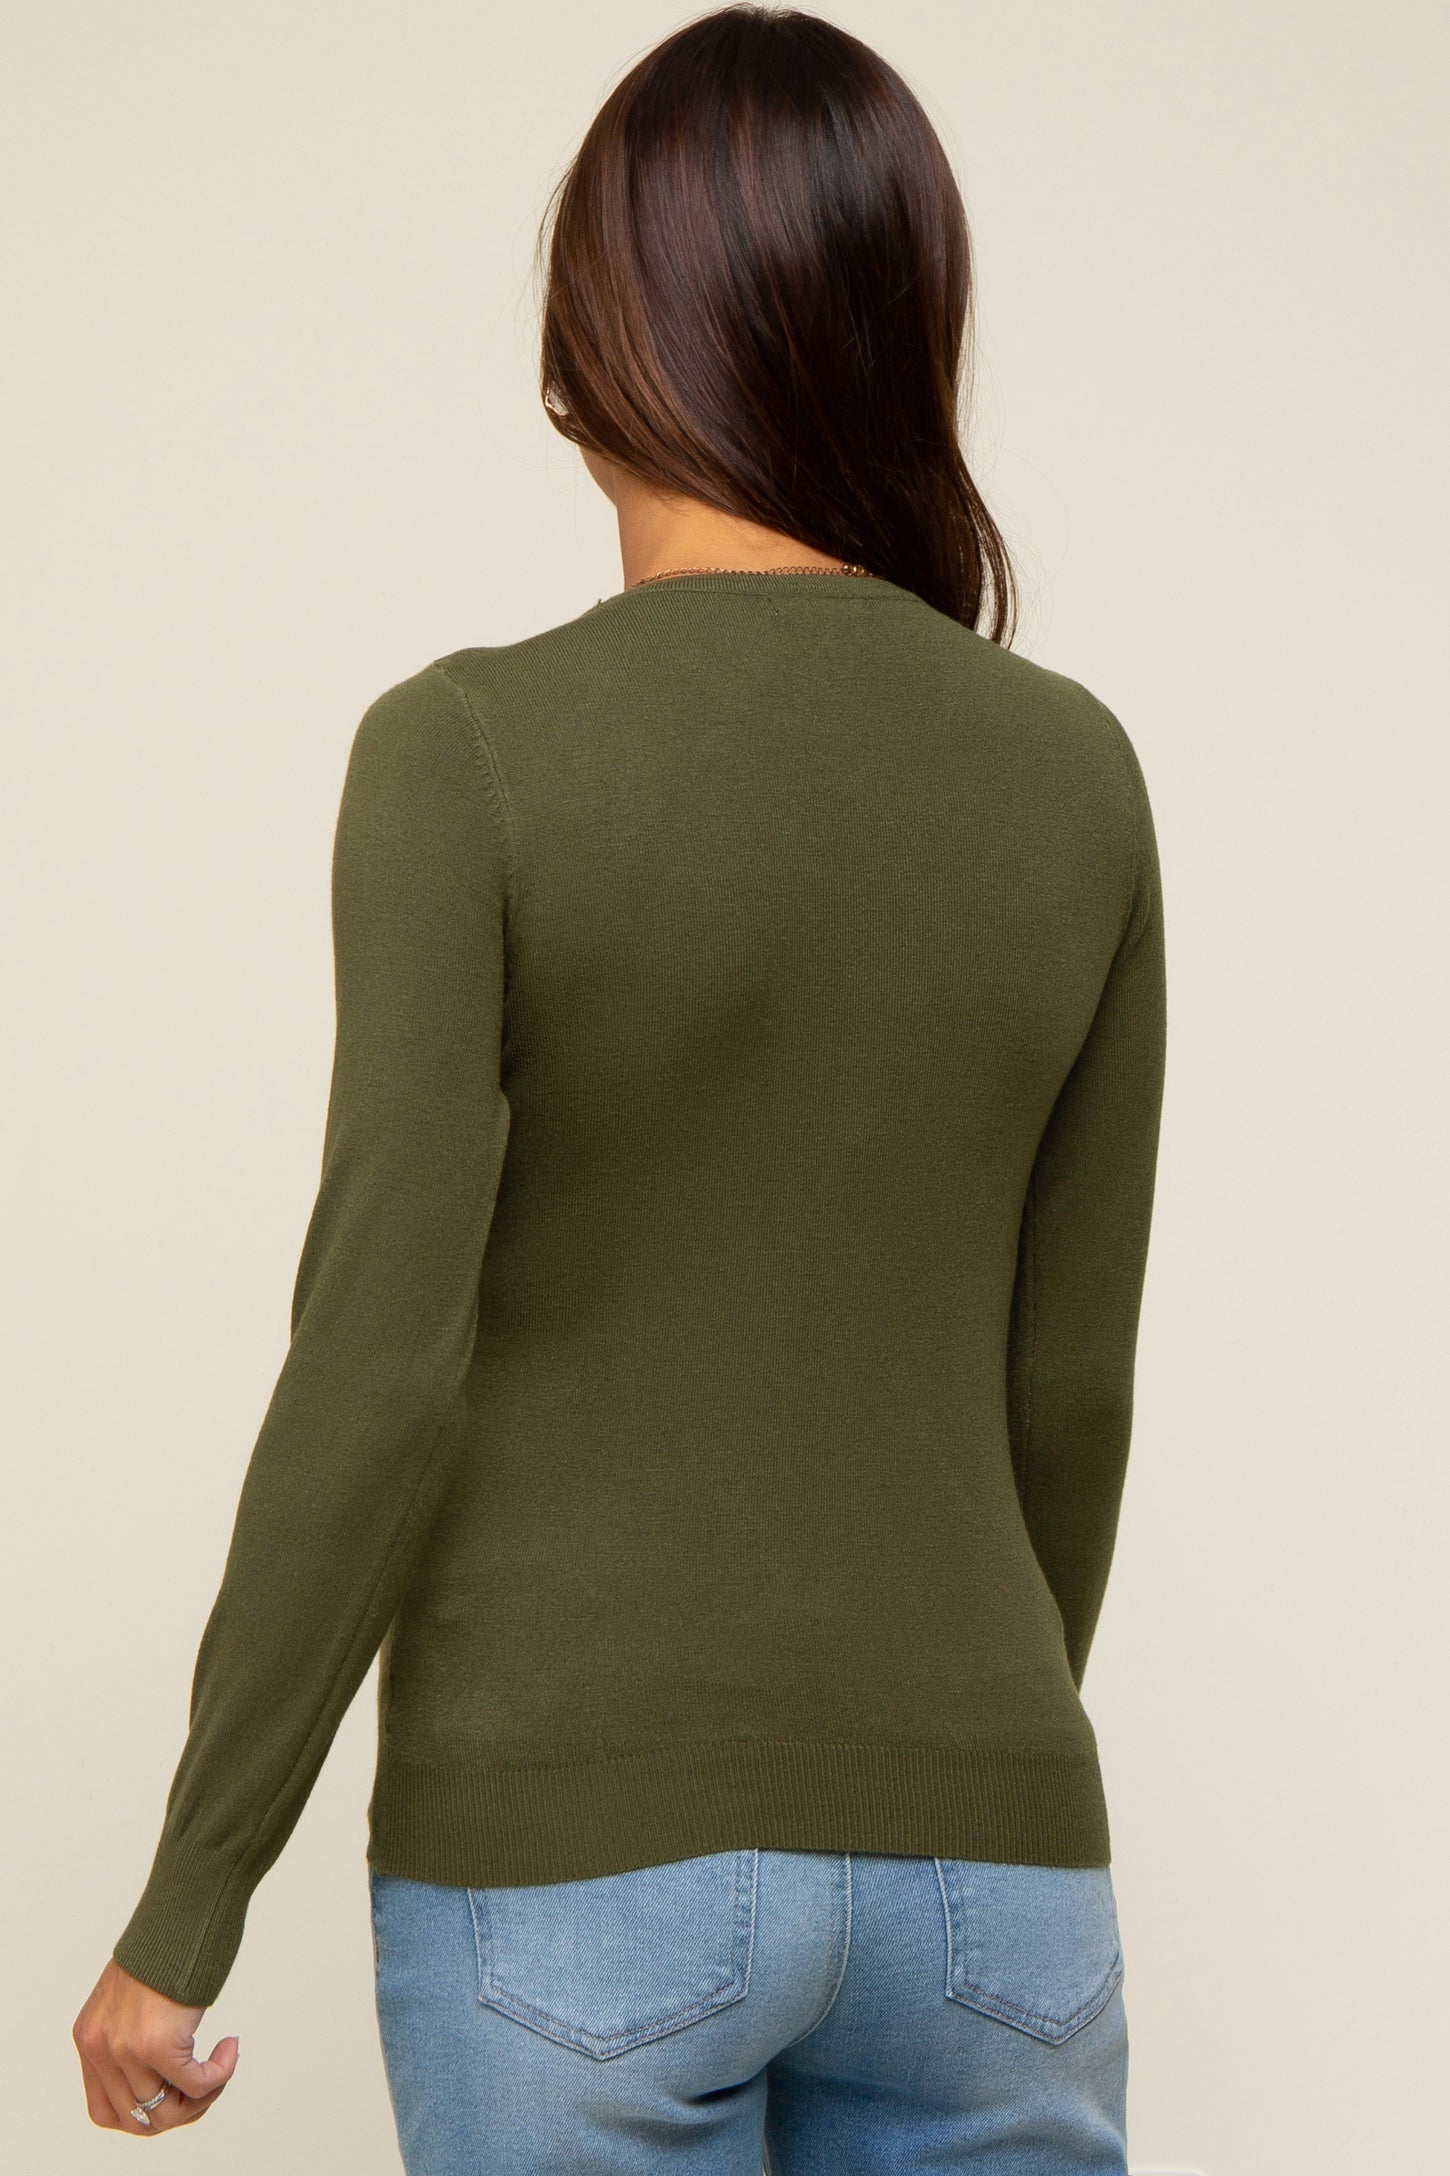 Olive Knit Long Sleeve Maternity Top